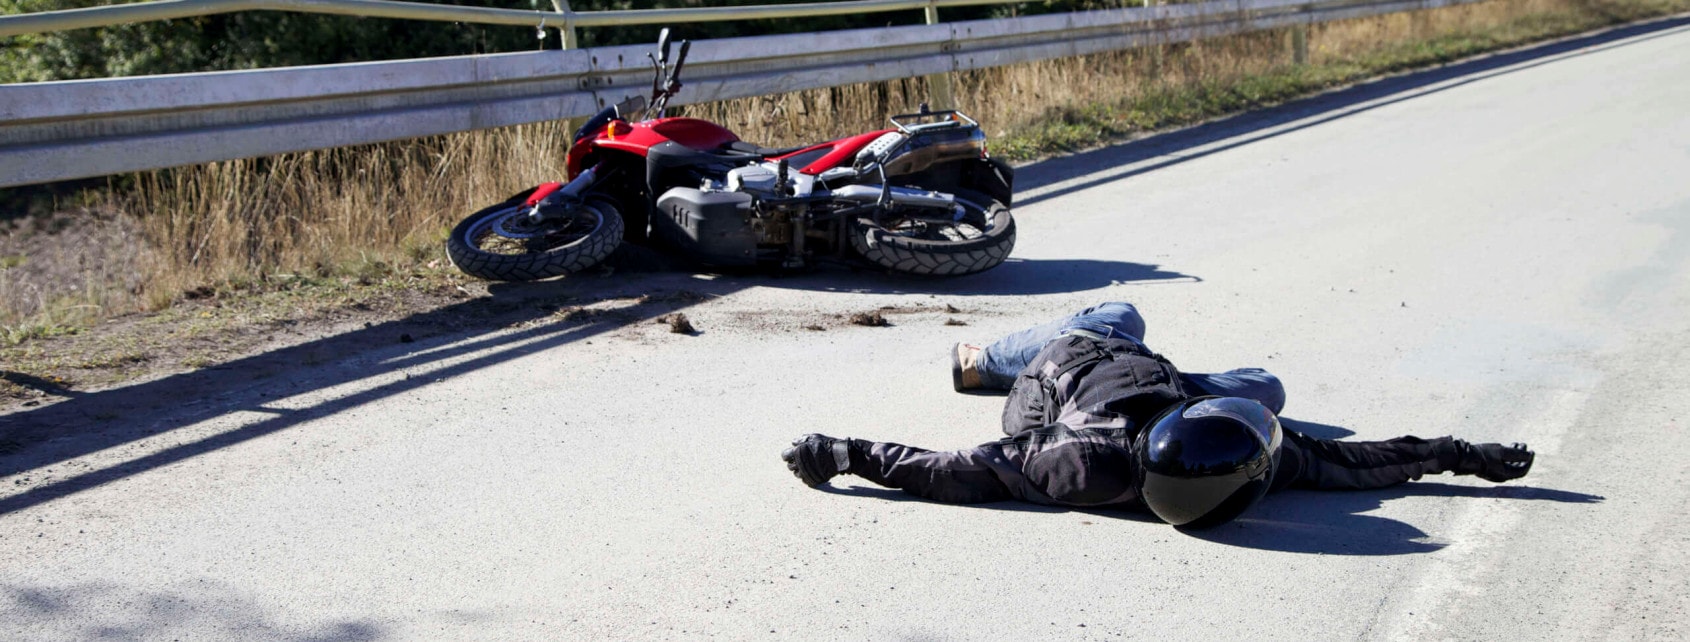 What Kind Of Compensation Can Motorcycle Accident Victims Recover In